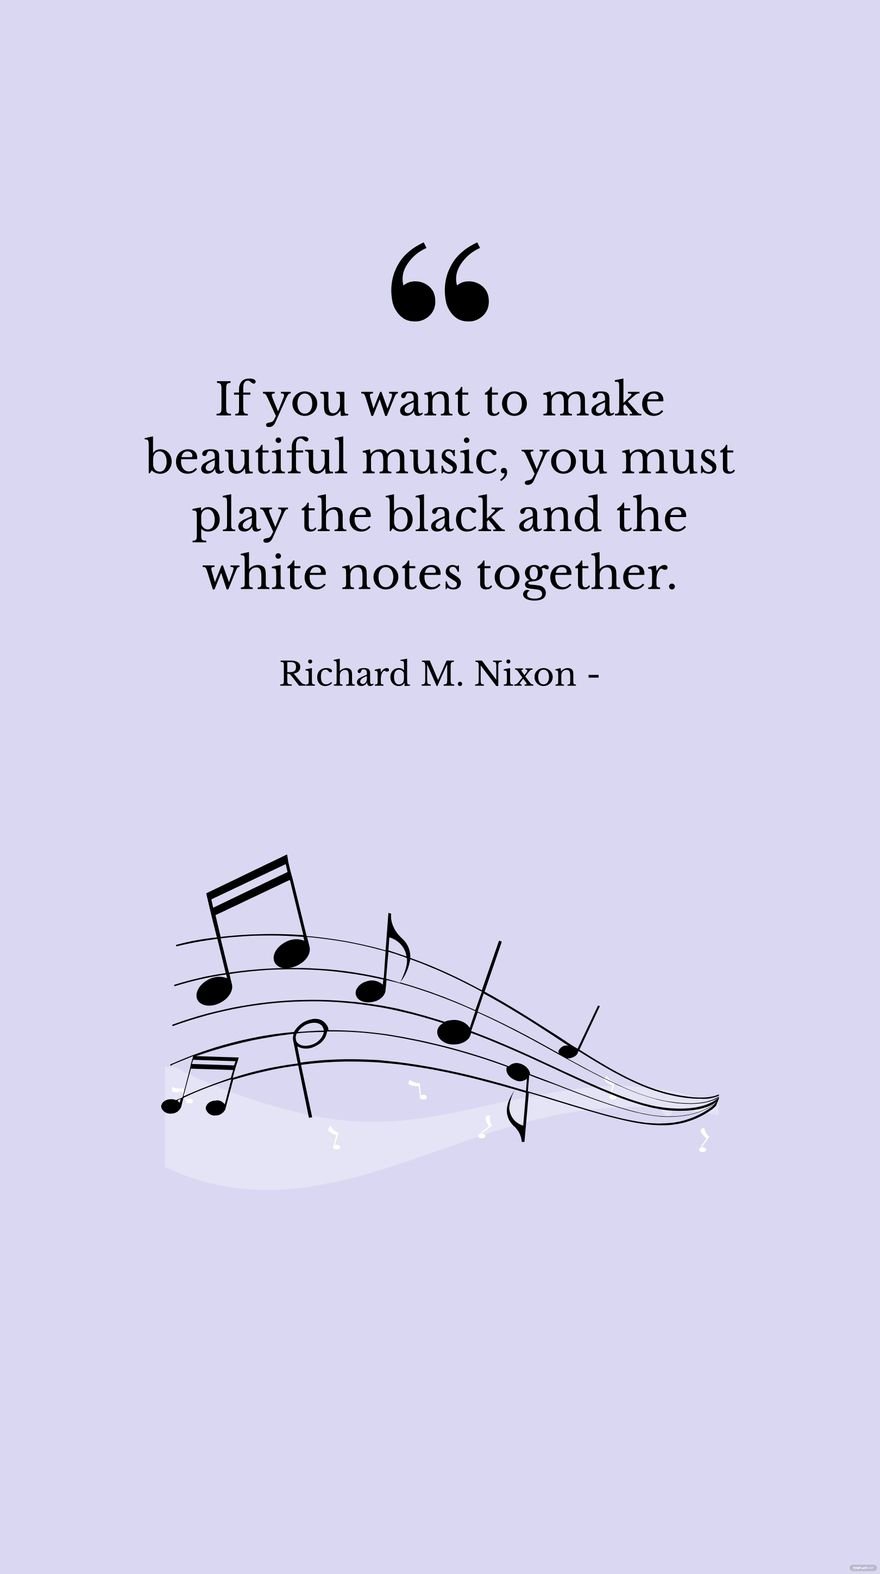 Richard M. Nixon - If you want to make beautiful music, you must play the black and the white notes together. in JPG